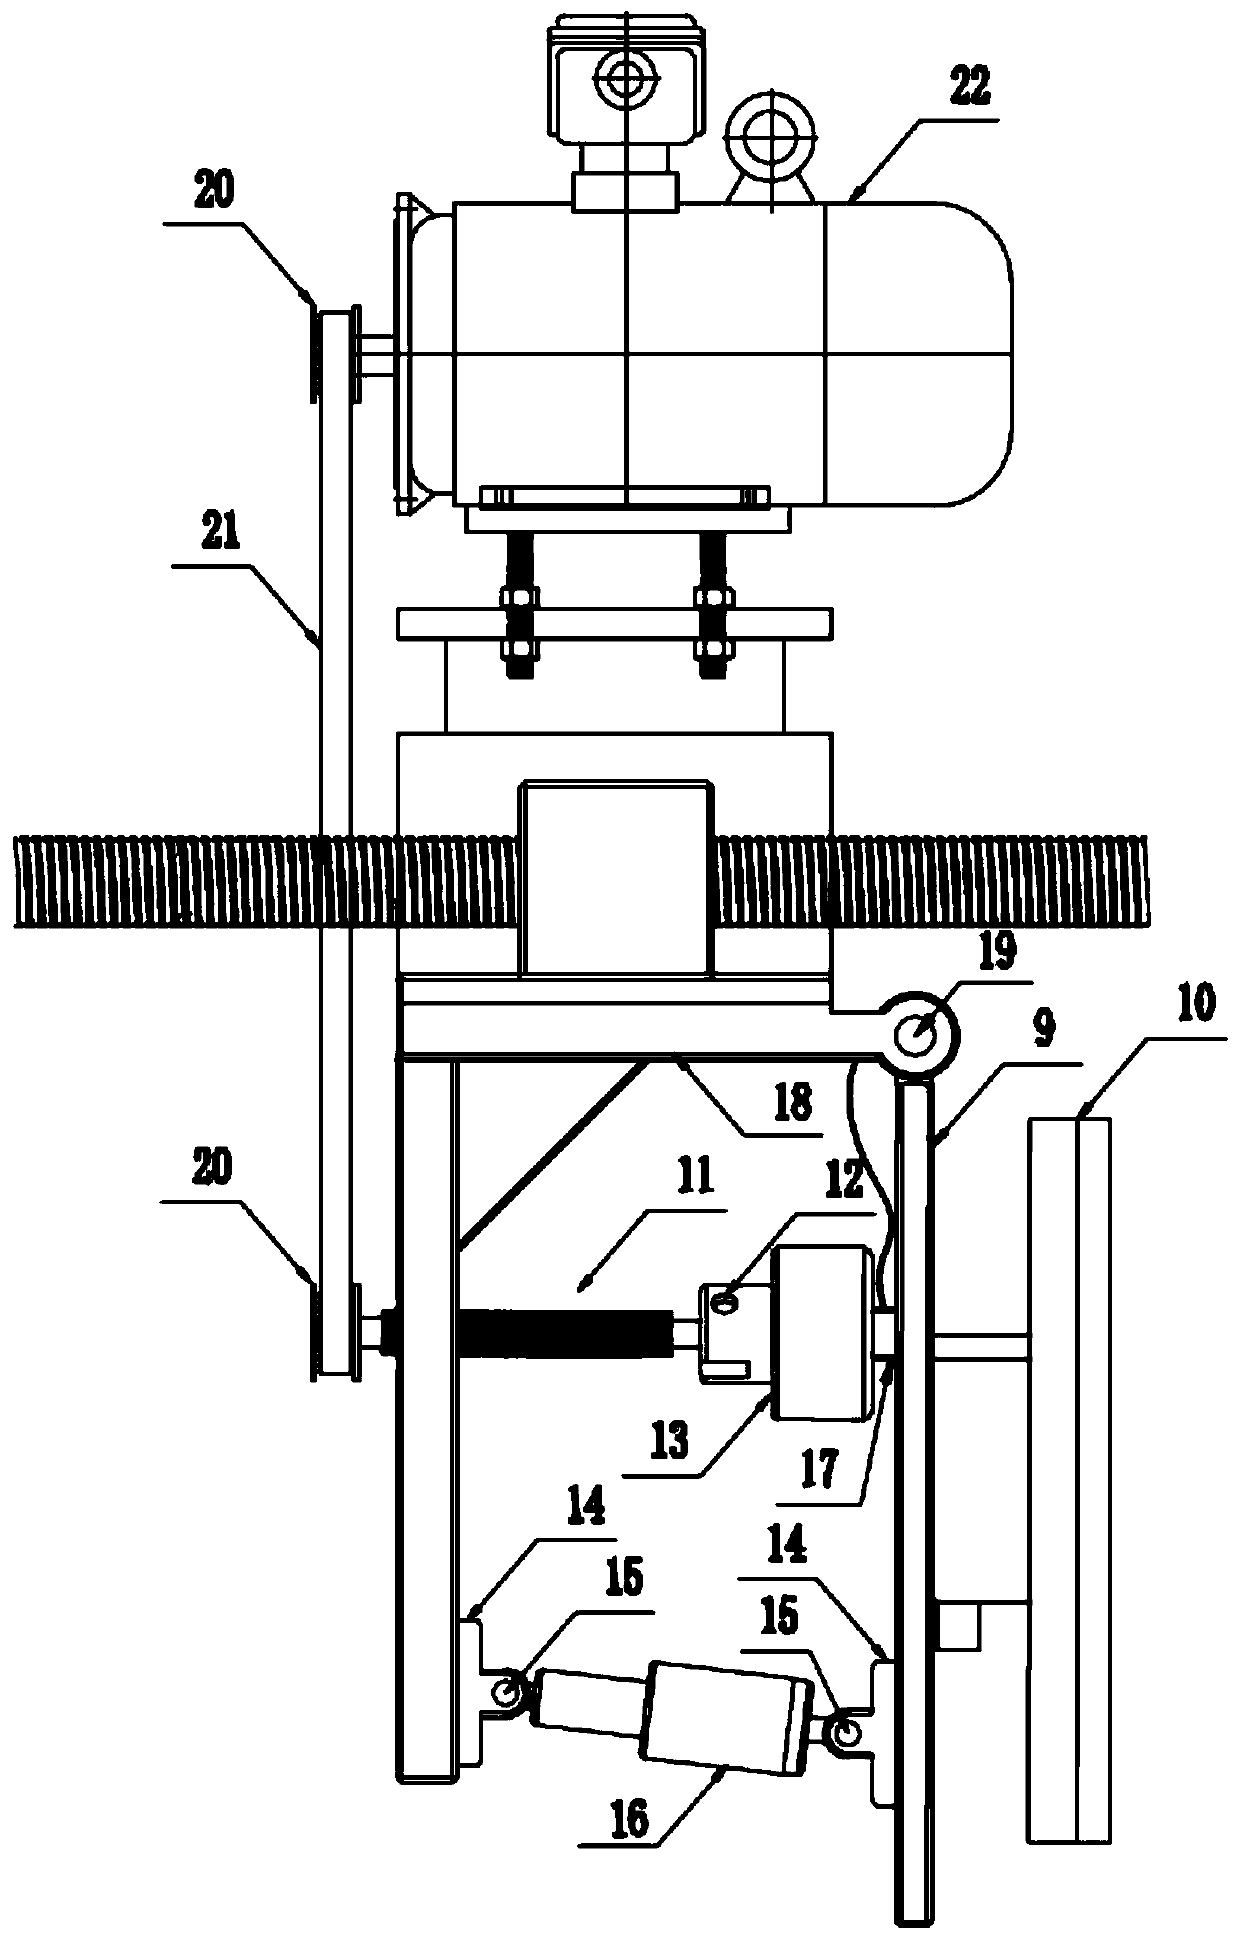 Adjustable stacking and flapping device